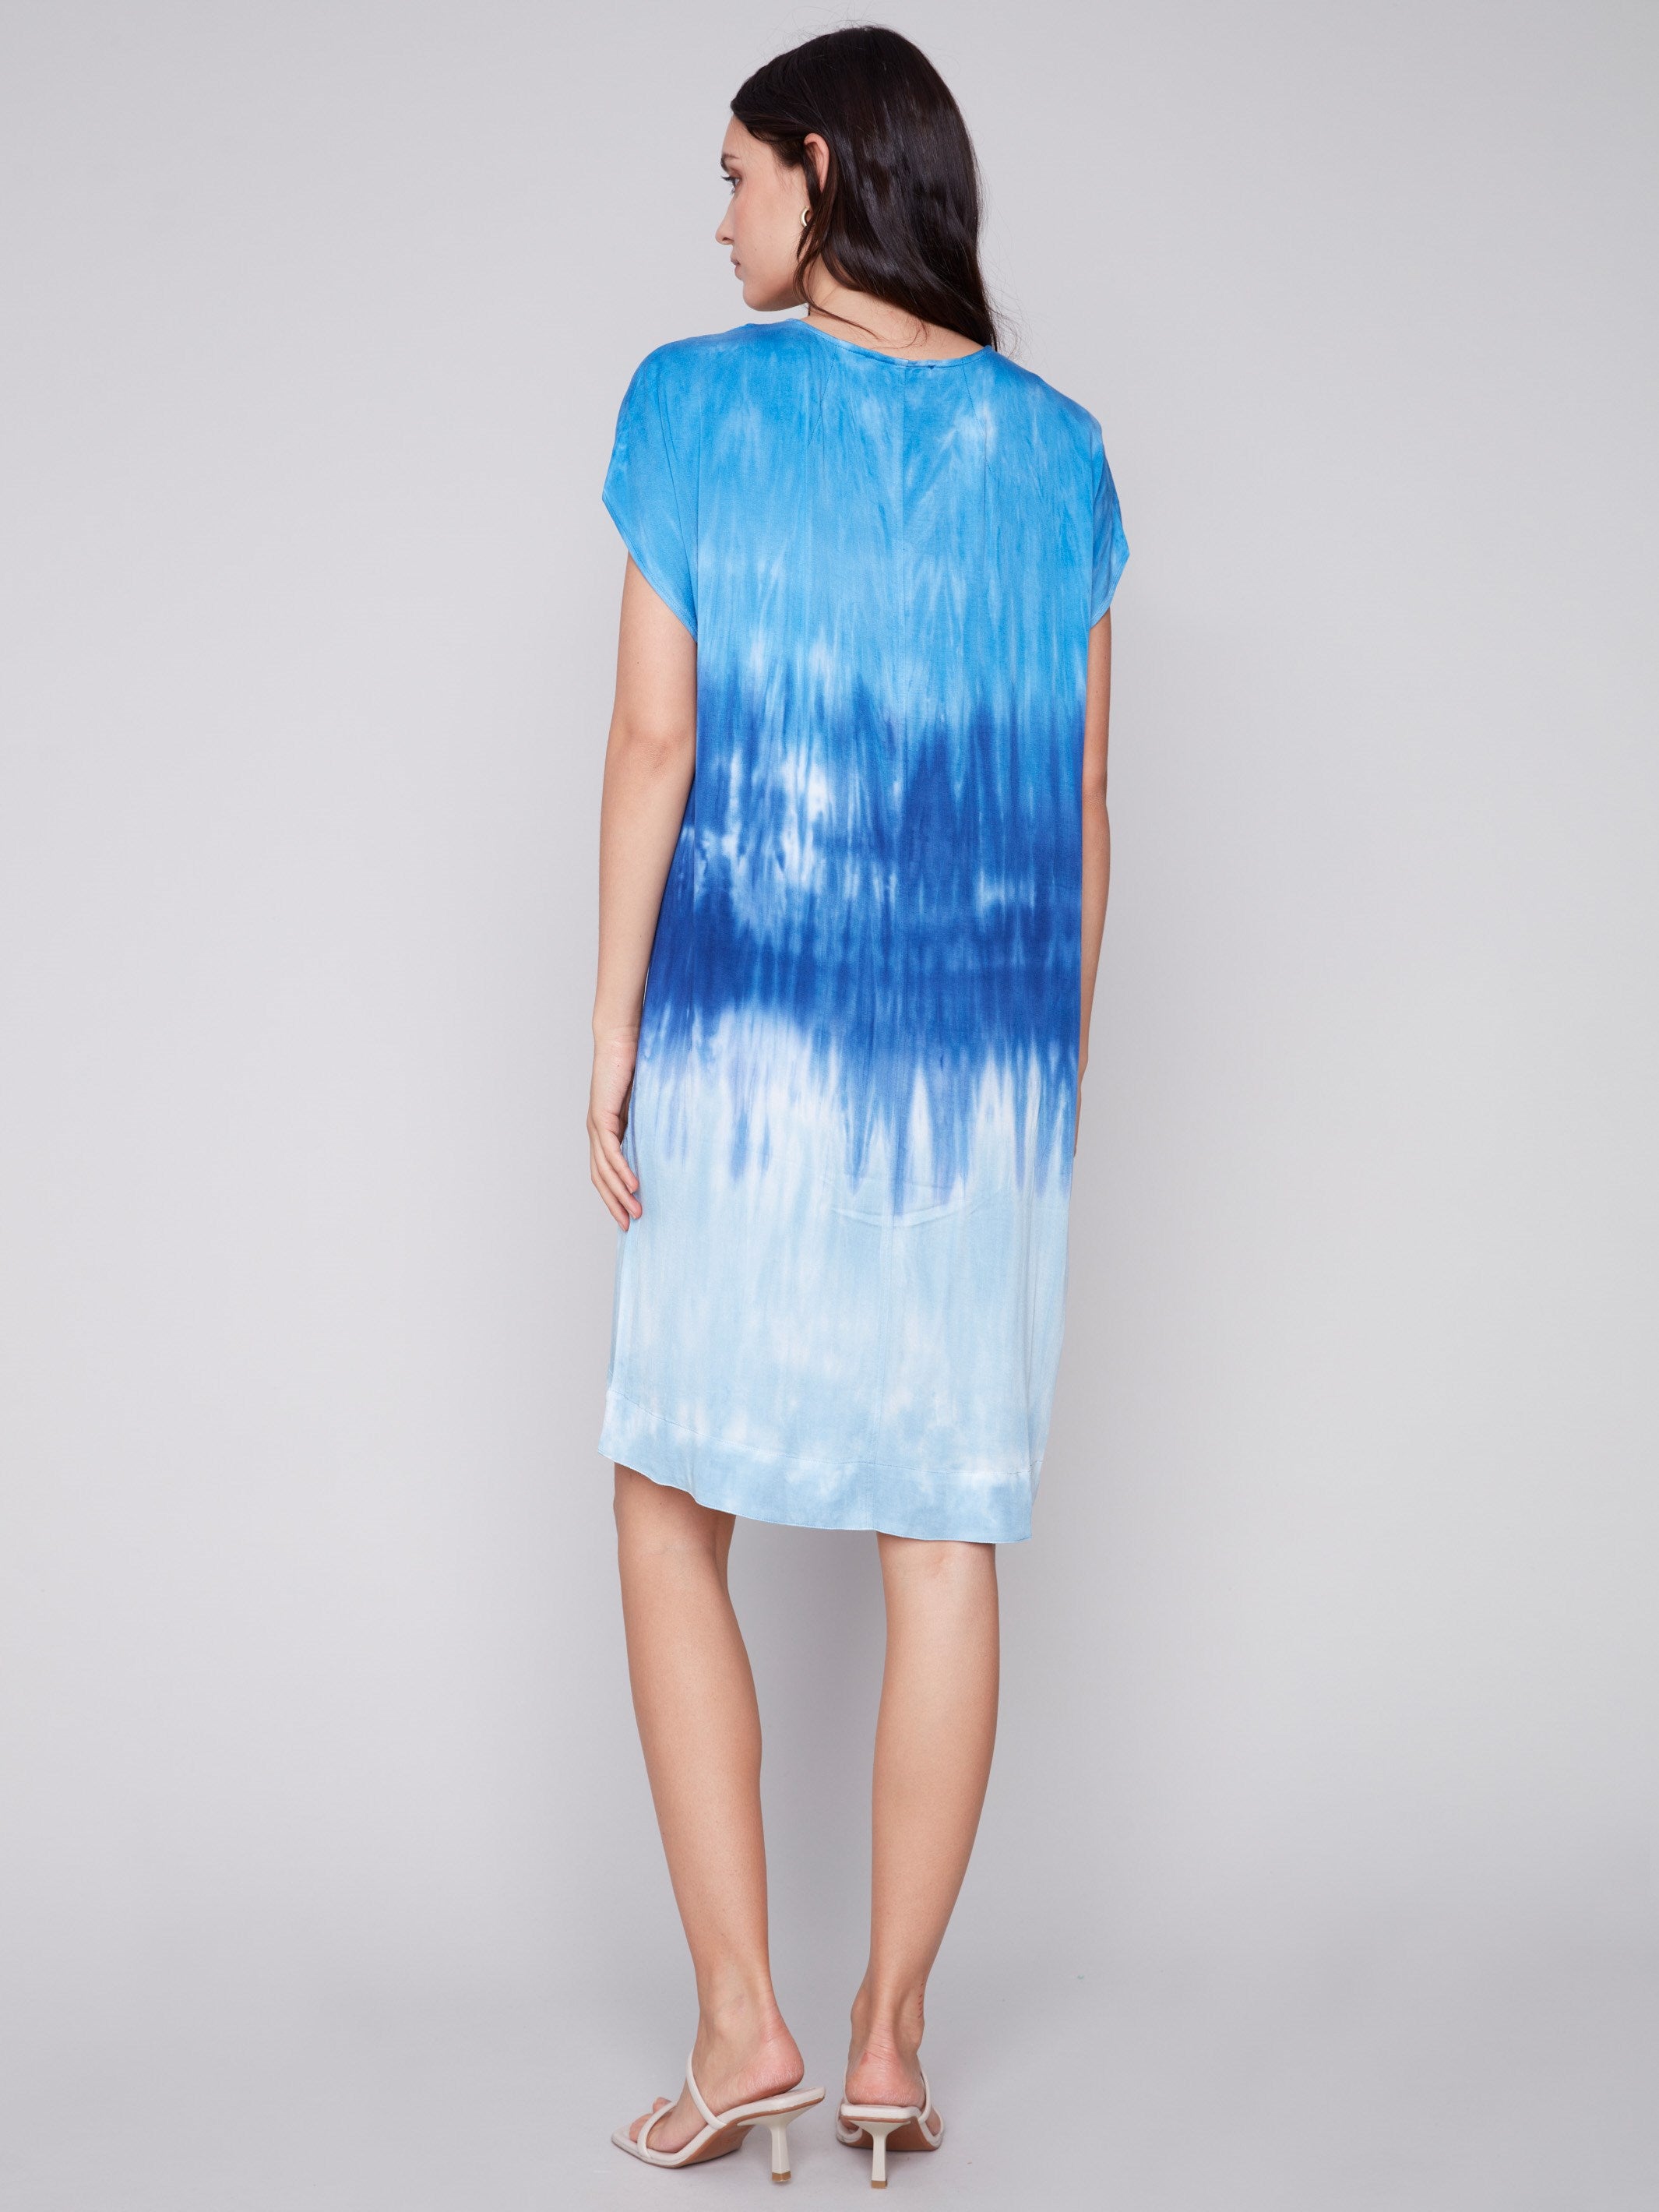 Tie-Dye Dress with Dolman Sleeves - Sky - Charlie B Collection Canada - Image 3